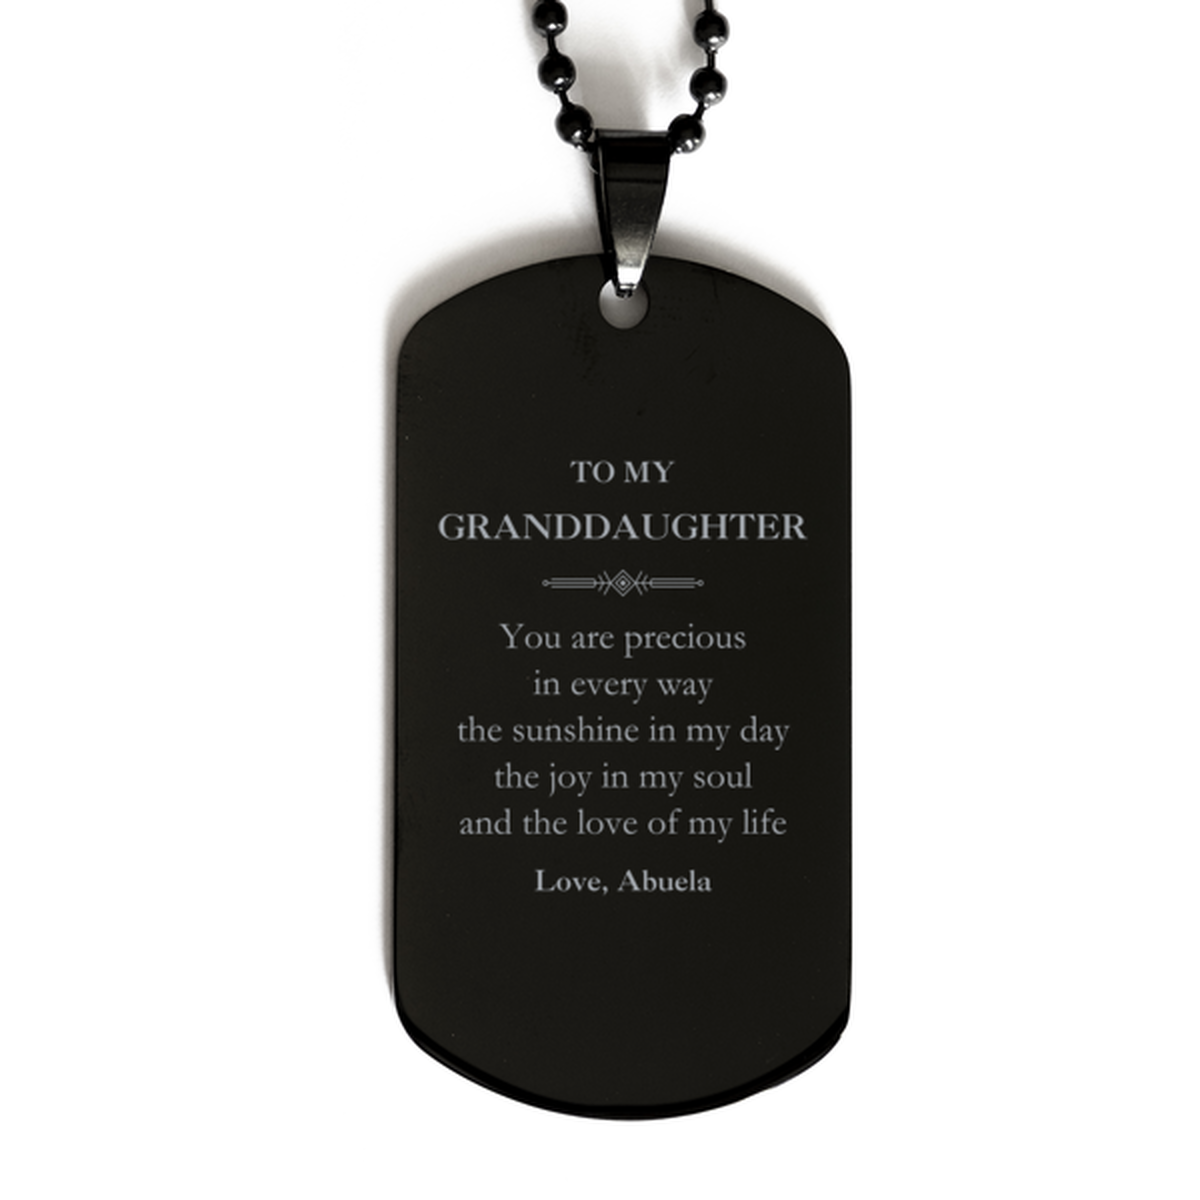 Graduation Gifts for Granddaughter Black Dog Tag Present from Abuela, Christmas Granddaughter Birthday Gifts Granddaughter You are precious in every way the sunshine in my day. Love, Abuela